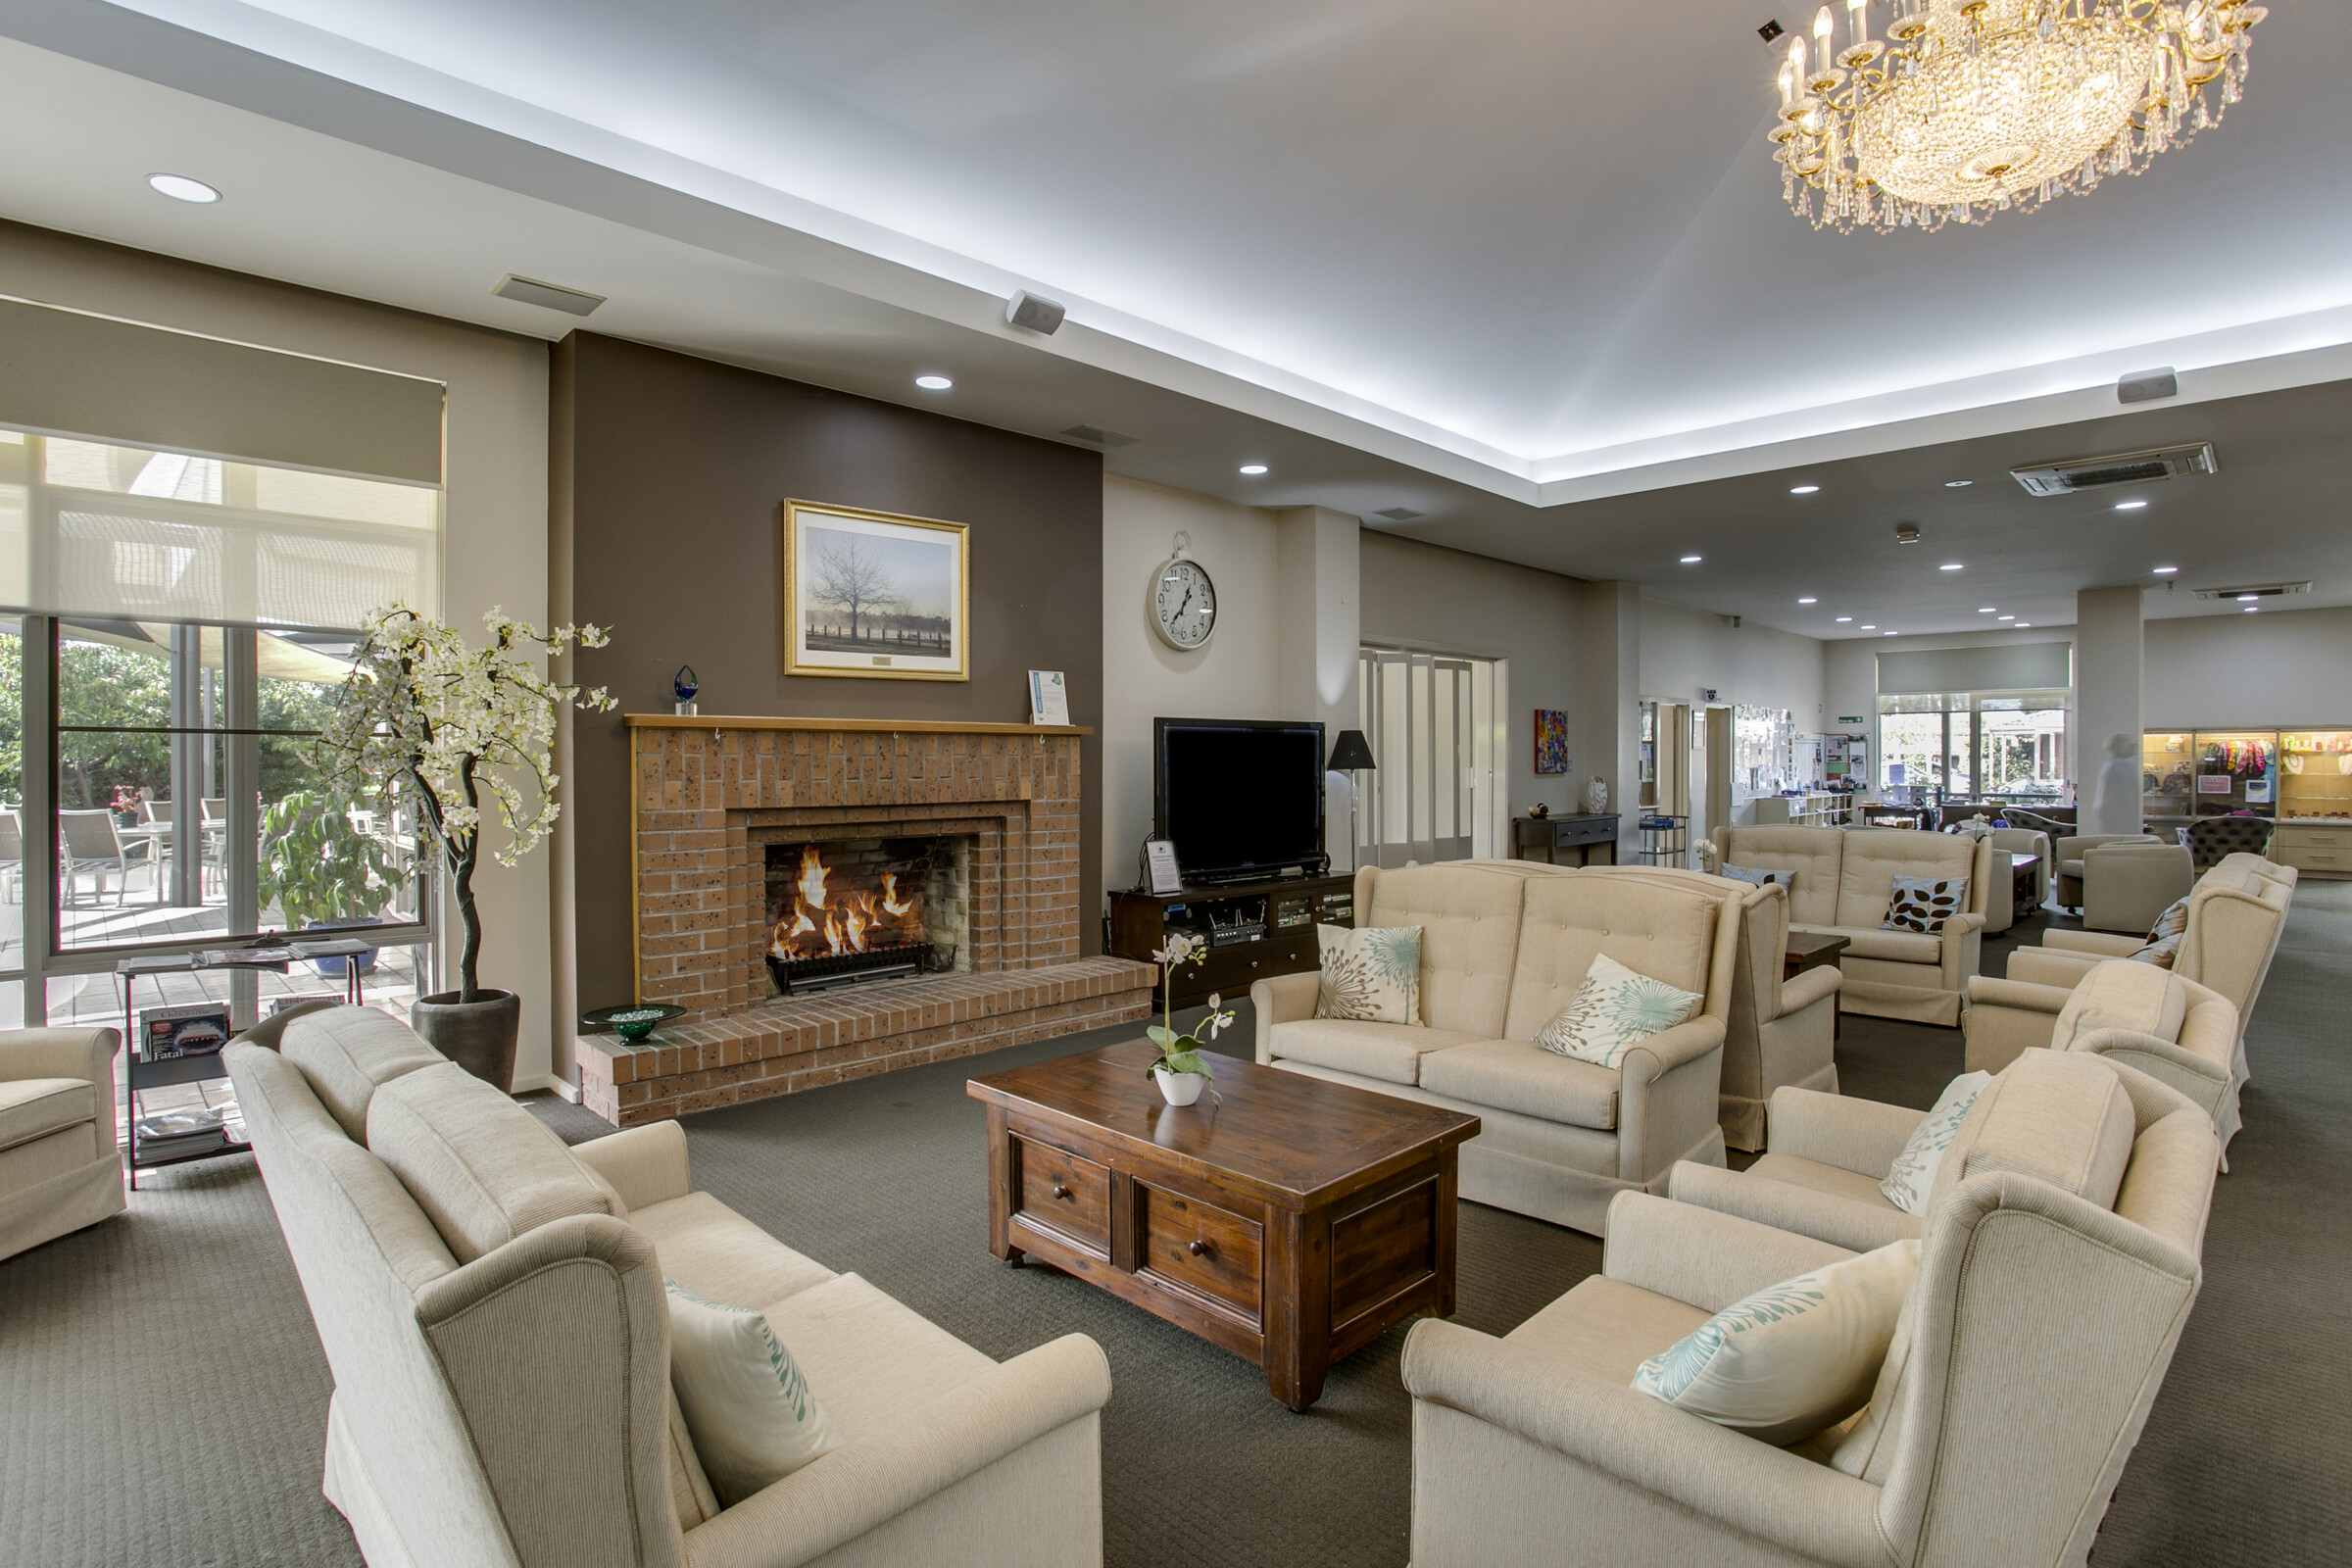 Highvale Village comfortable lounge area with fireplace